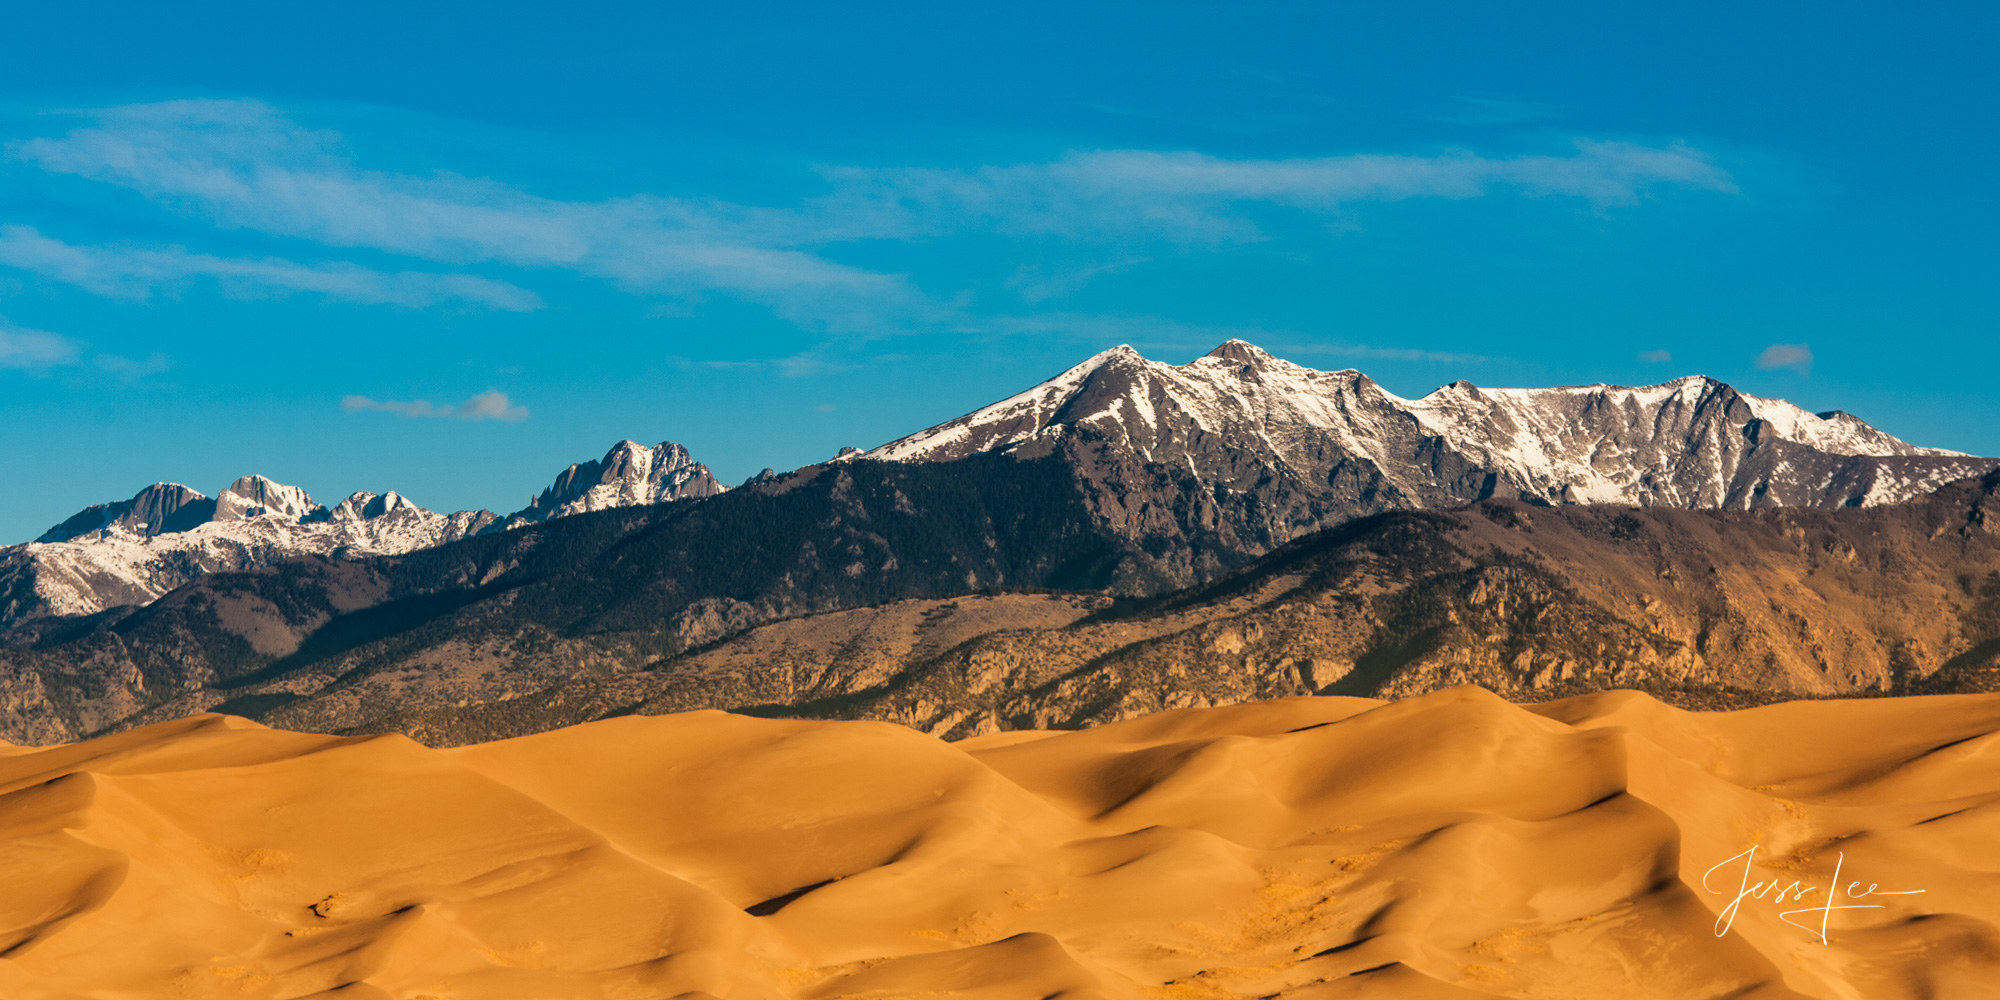 A Colorado Fall Color Print of the Great Sand Dunes. A limited Edition Fine Art print of 200 archival Museum Quality artworks...